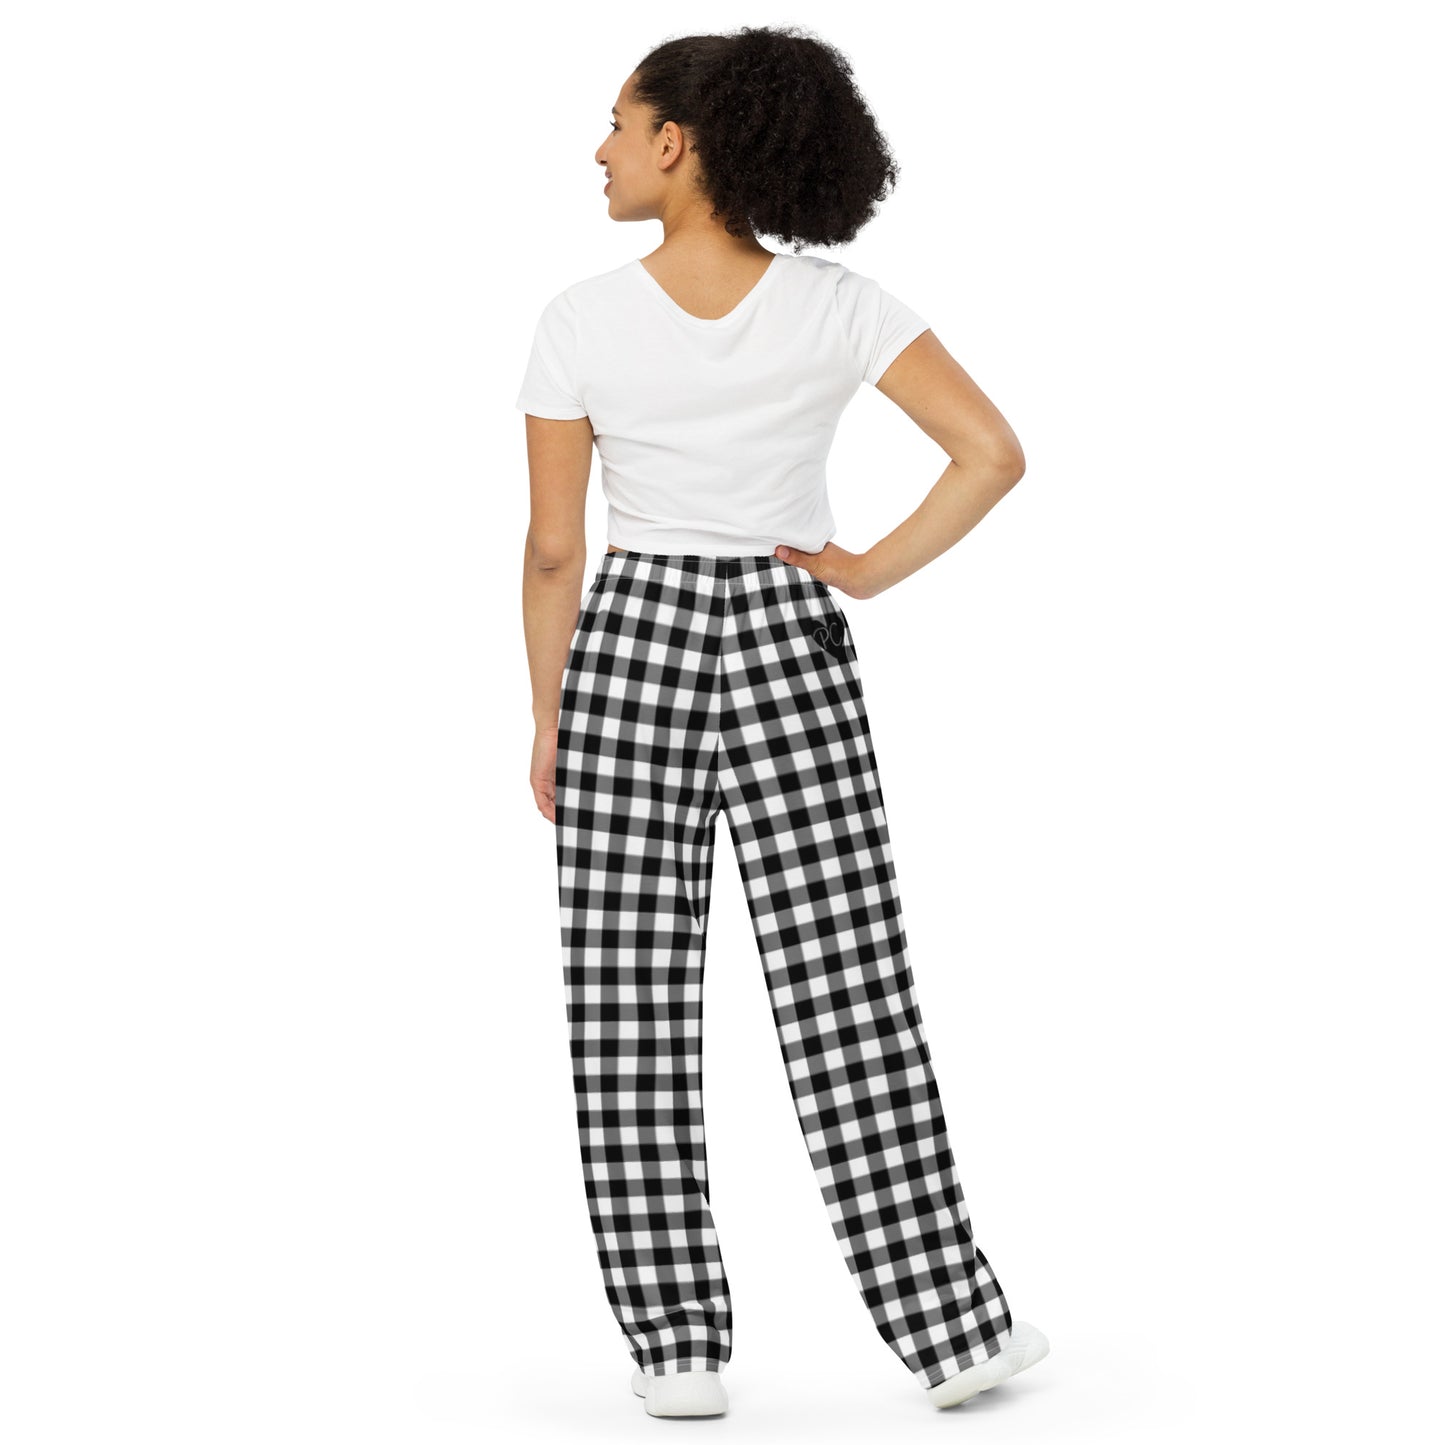 Hattie Badass Black Gingham Wide-Leg Lounge Pants | Pinup Couture Relaxed